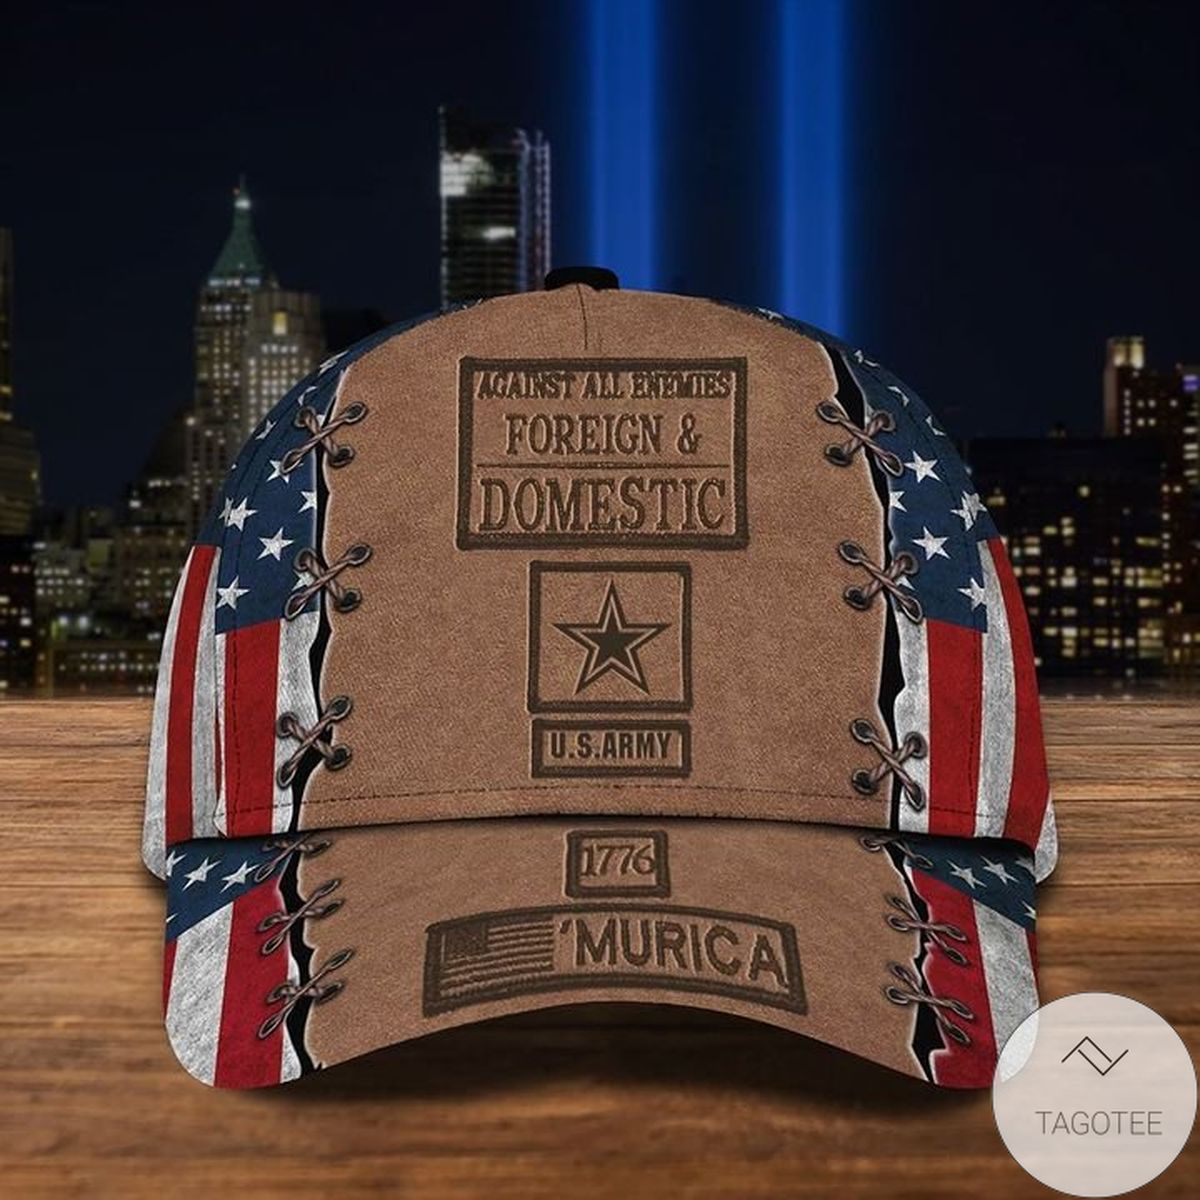 US Army Hat 1776 'Murica Against All Enemies Foreign & Domestic USA Flag Army Retirement Gift Cap